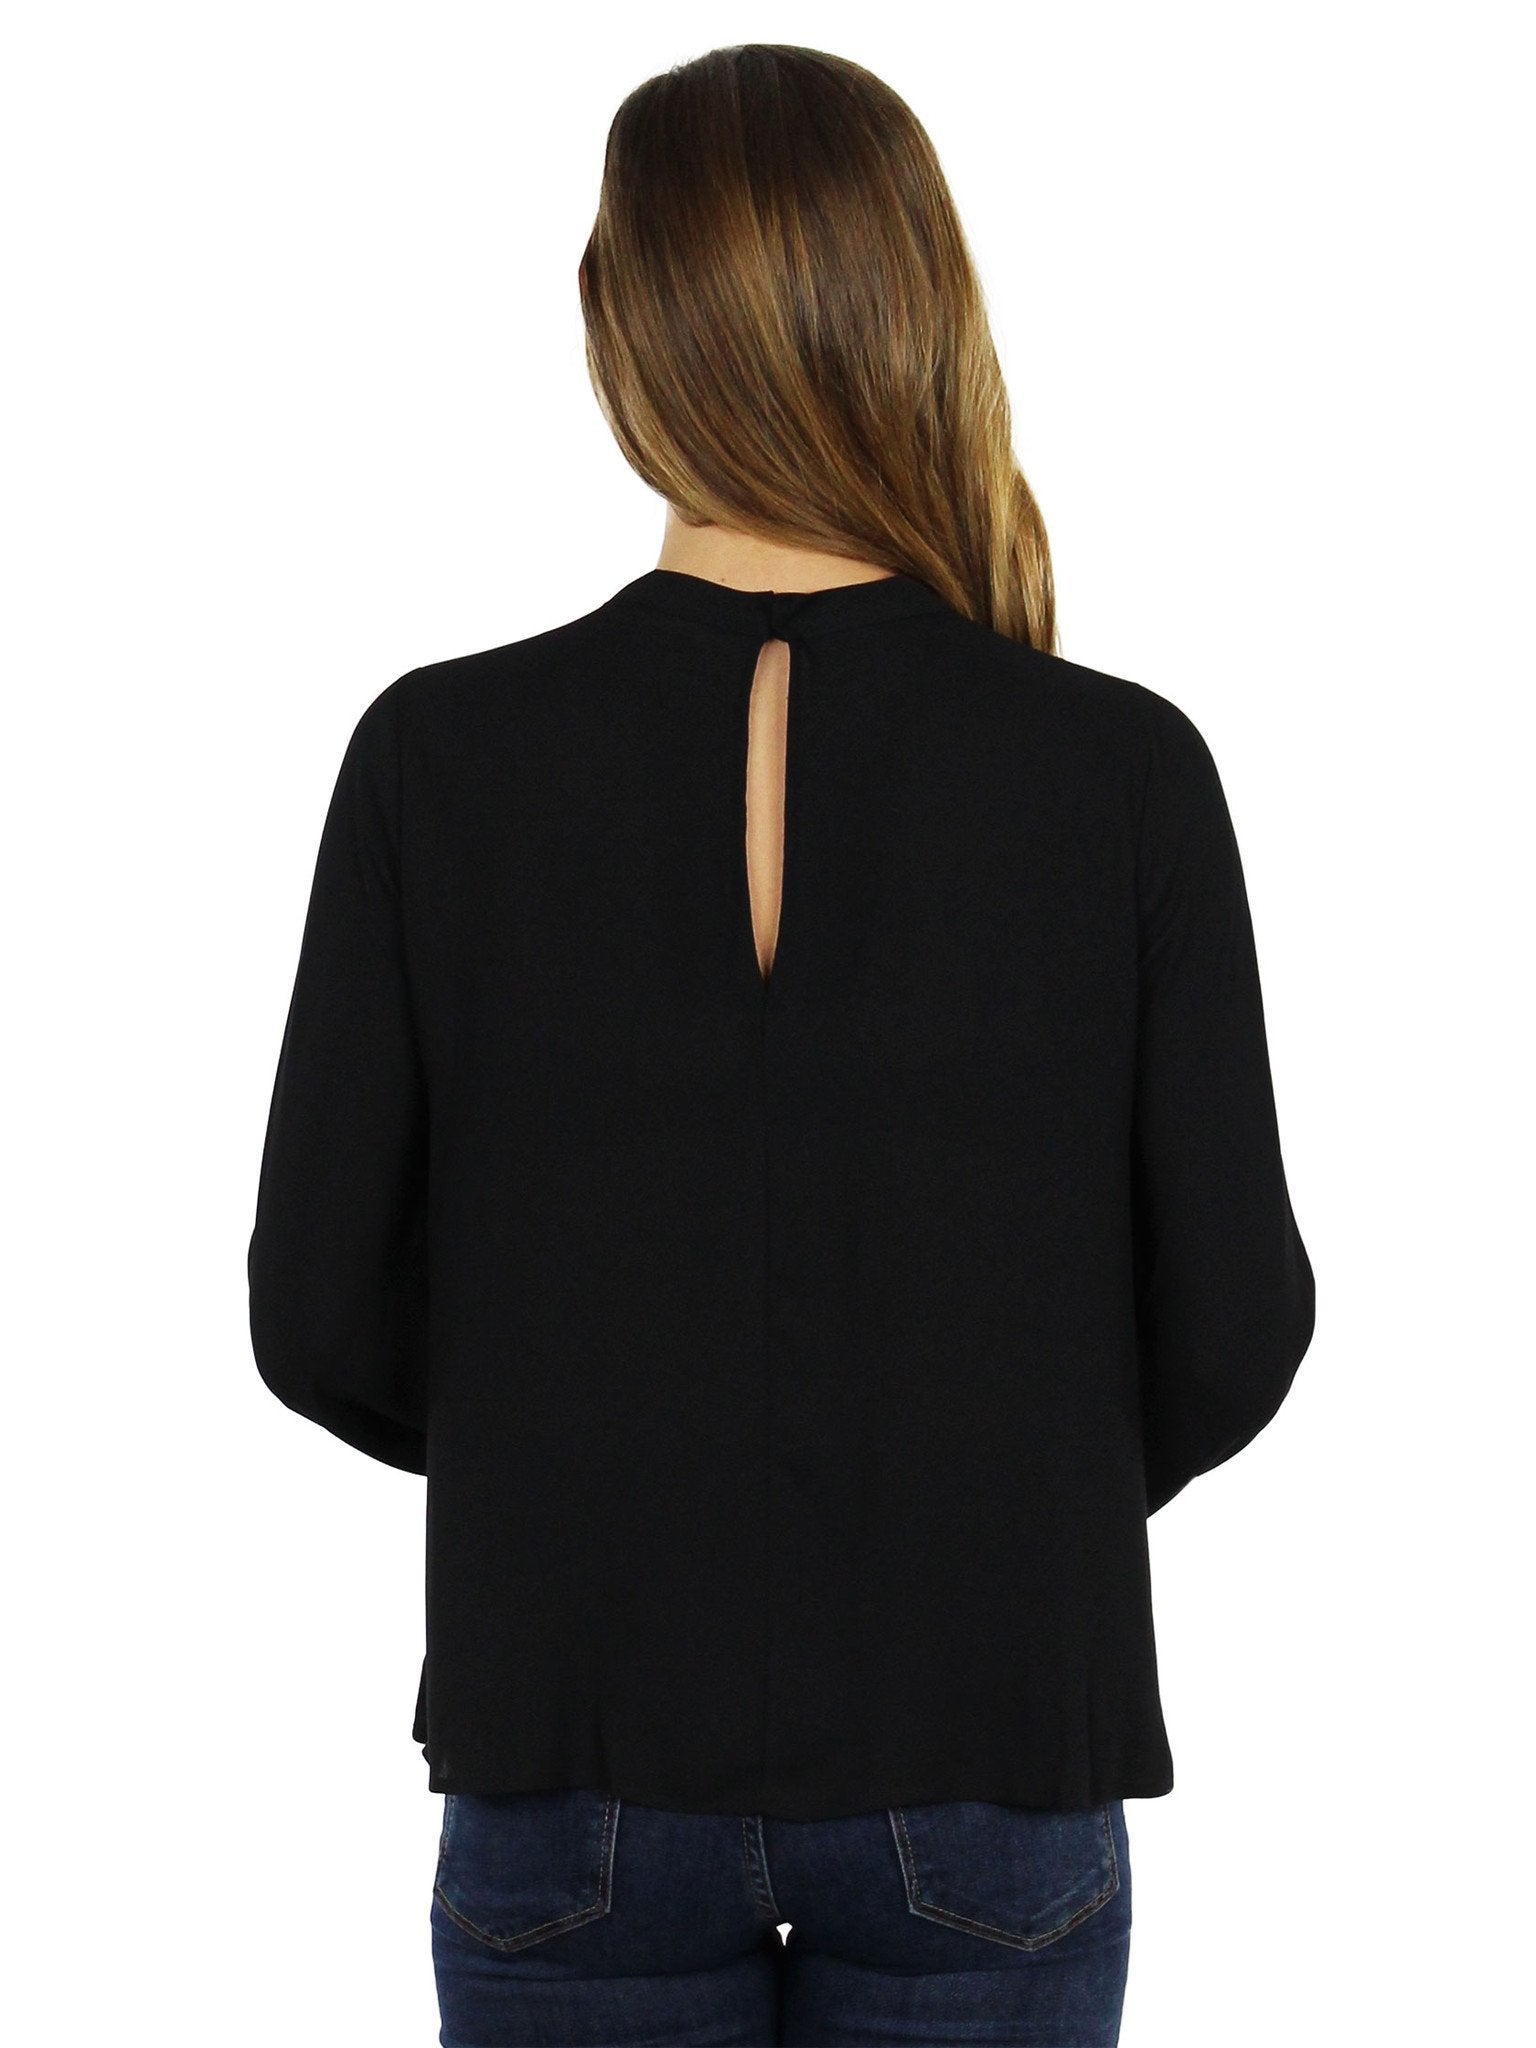 Women wearing a top rental from Lush called Back To Basics Tunic